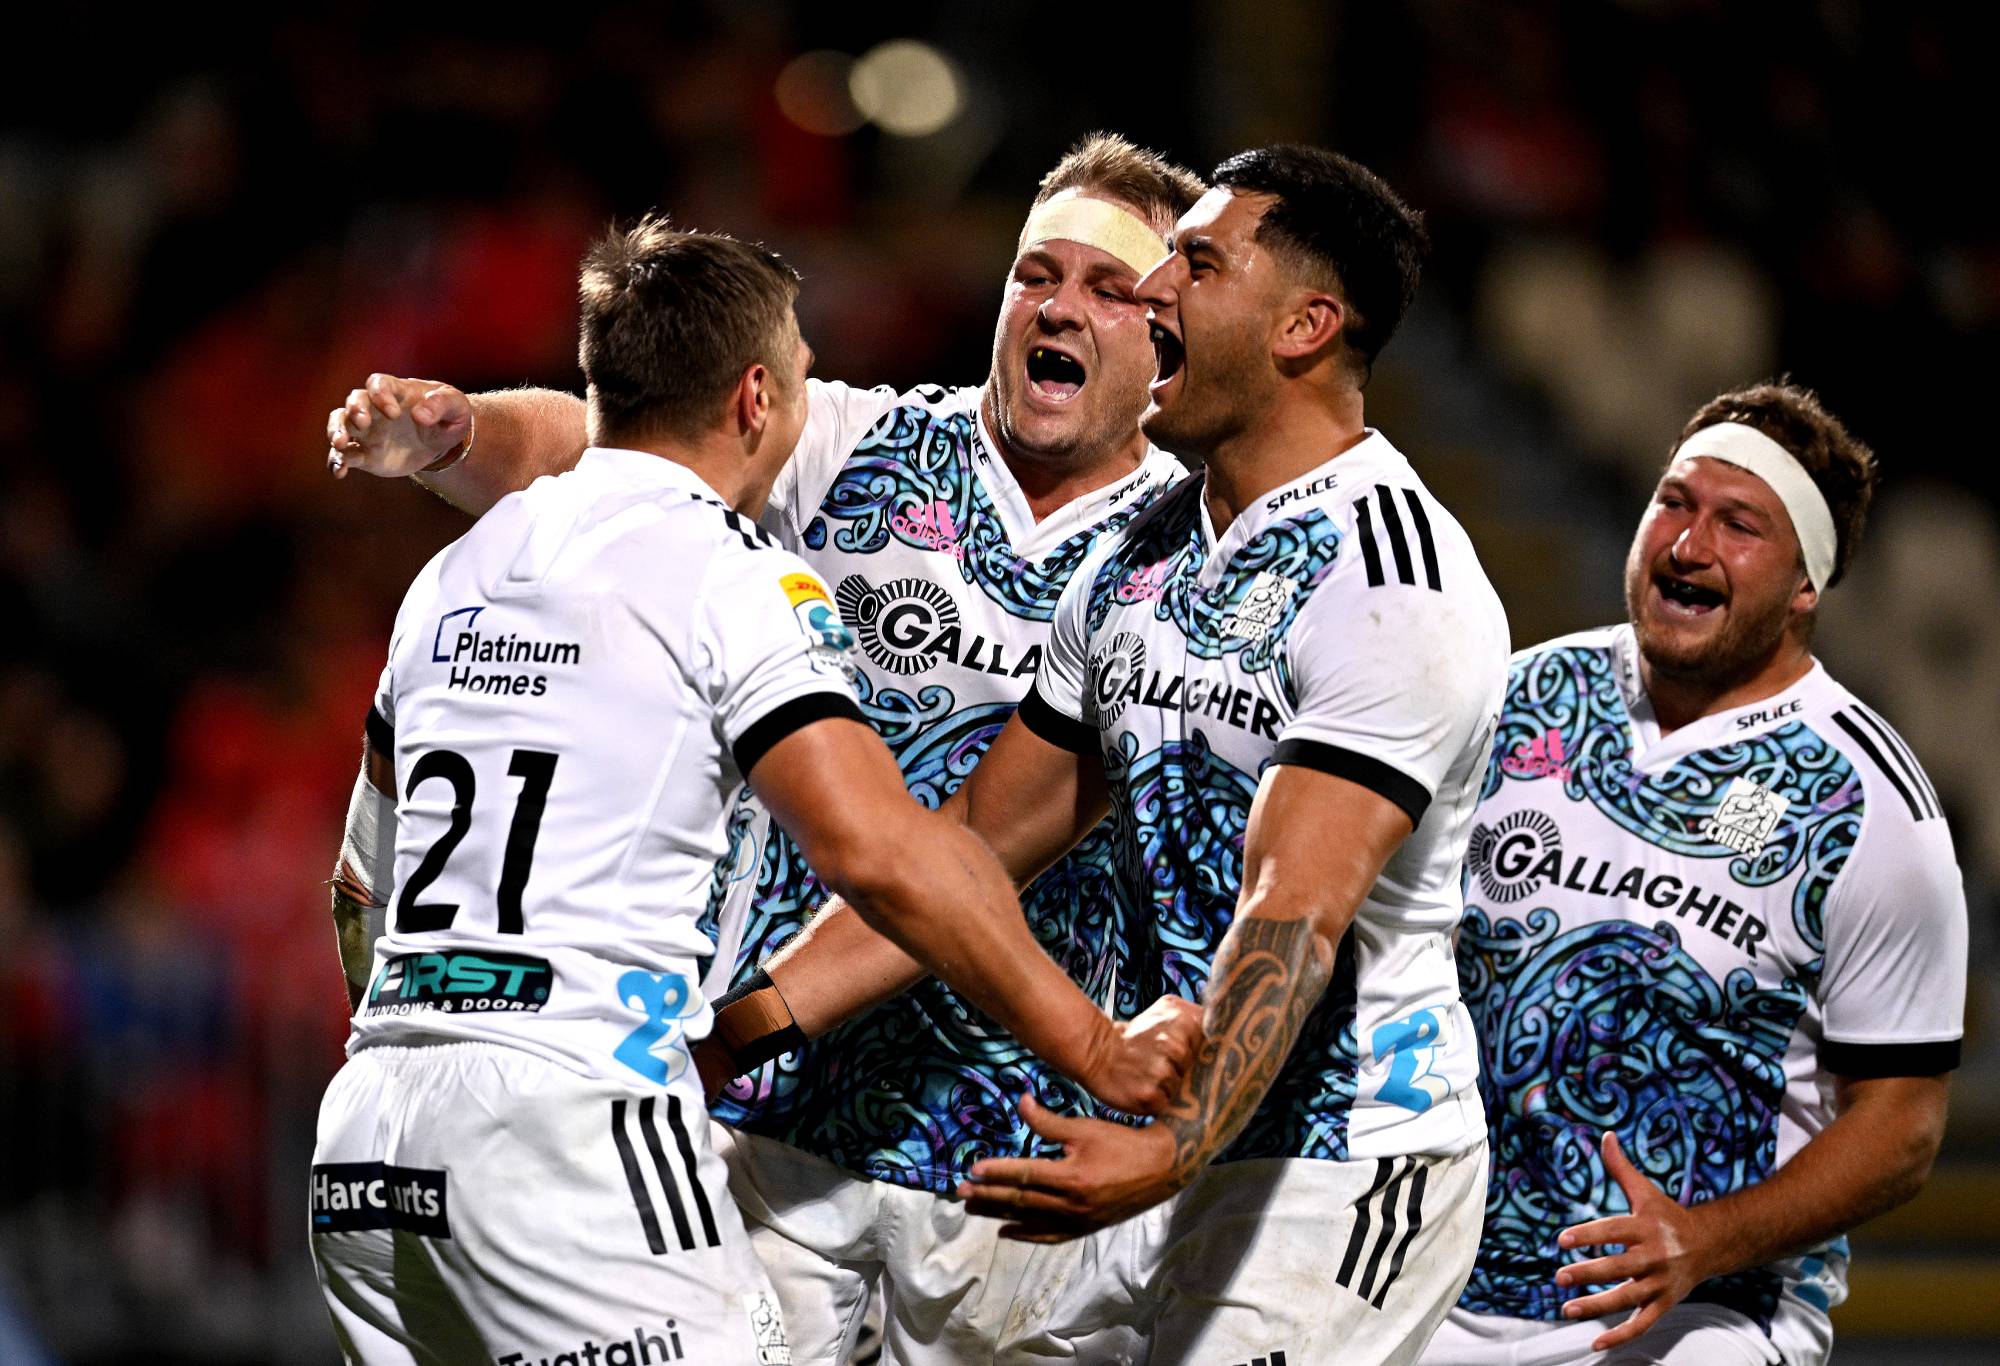 Cortez Ratima of the Chiefs celebrates with his team after scoring a try during the round one Super Rugby Pacific match between Crusaders and Chiefs at Orangetheory Stadium, on February 24, 2023, in Christchurch, New Zealand. (Photo by Joe Allison/Getty Images)